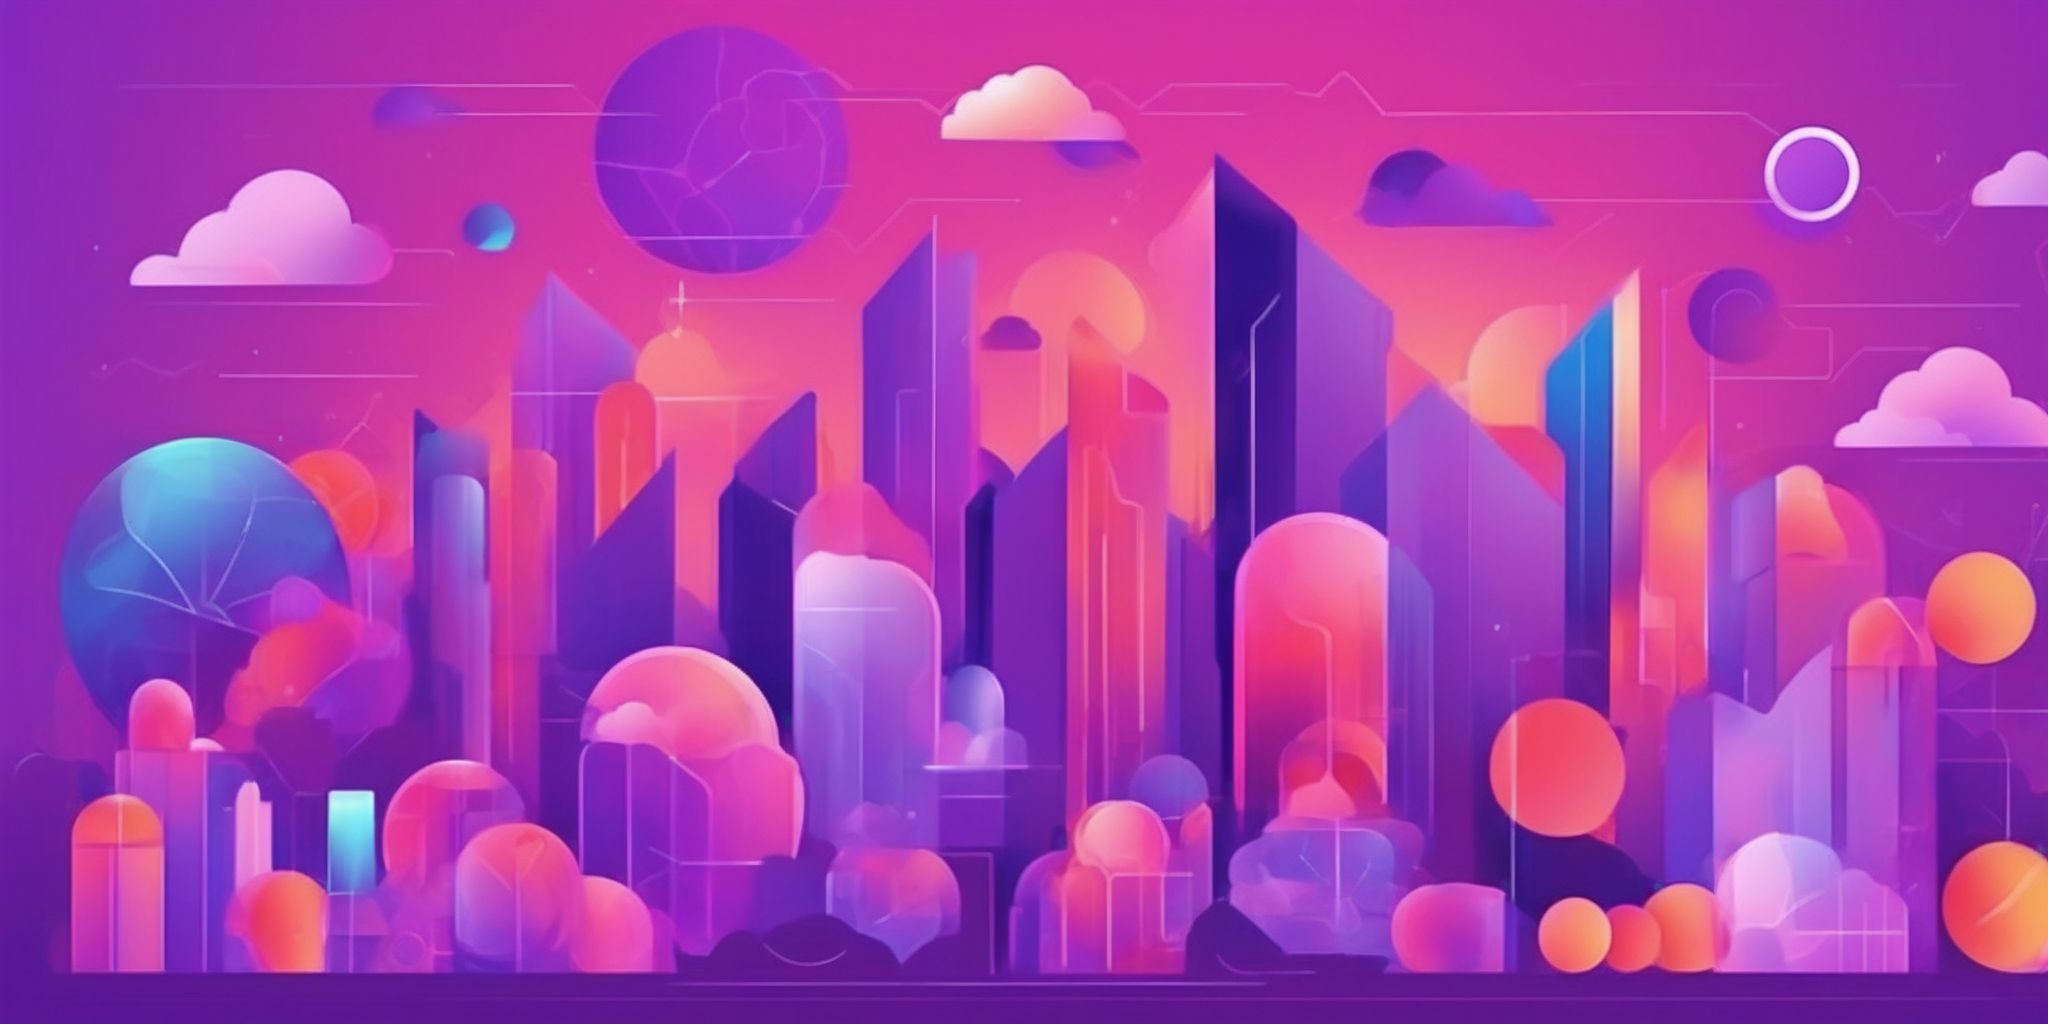 Resources in flat illustration style, colorful purple gradient colors